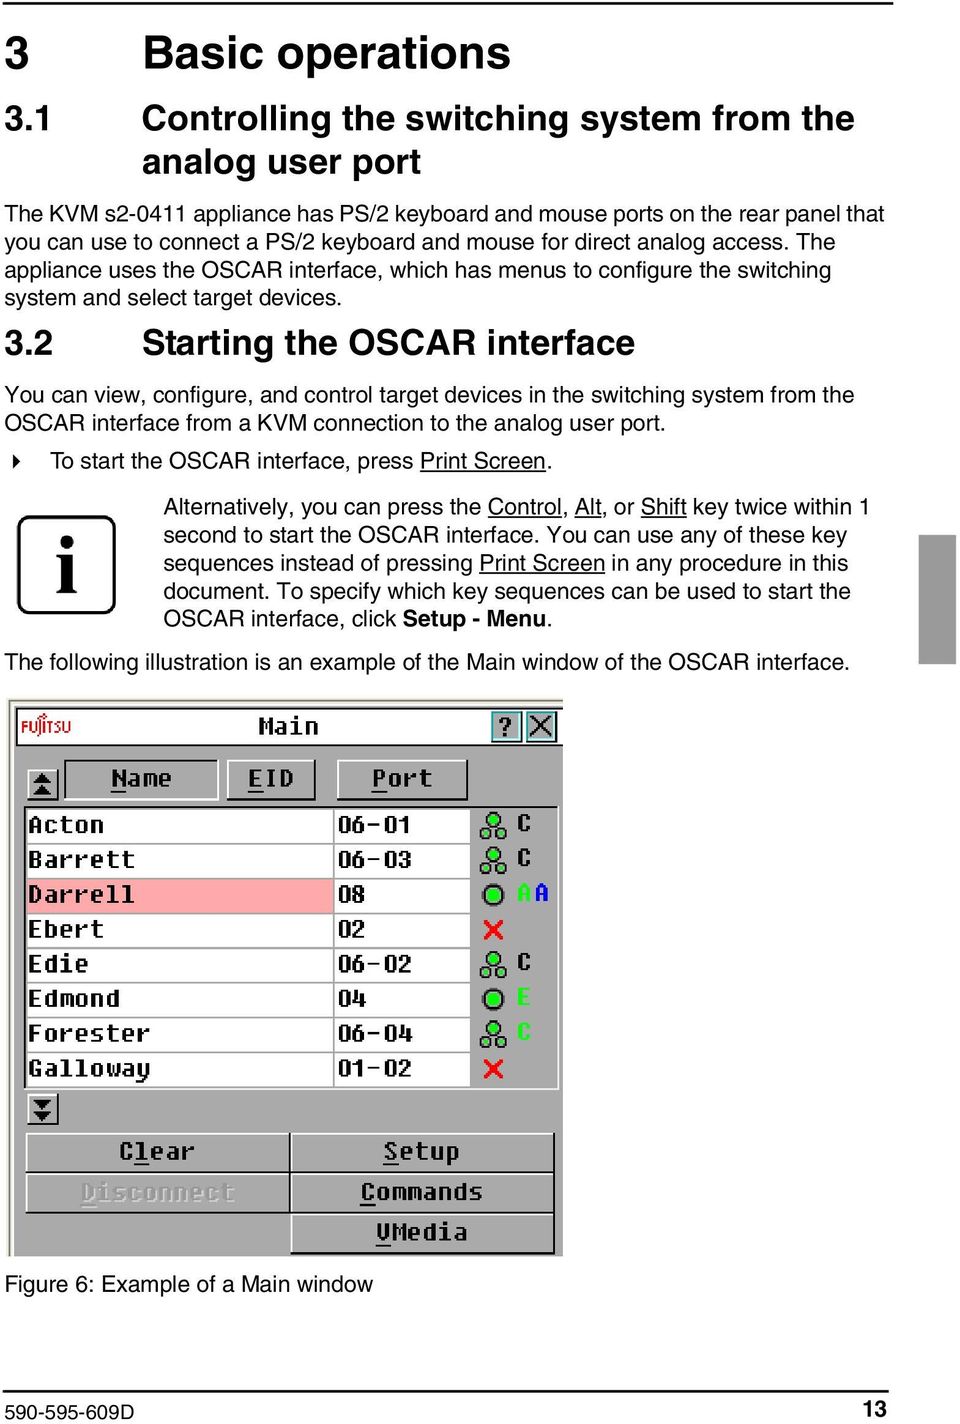 direct analog access. The appliance uses the OSCAR interface, which has menus to configure the switching system and select target devices. 3.